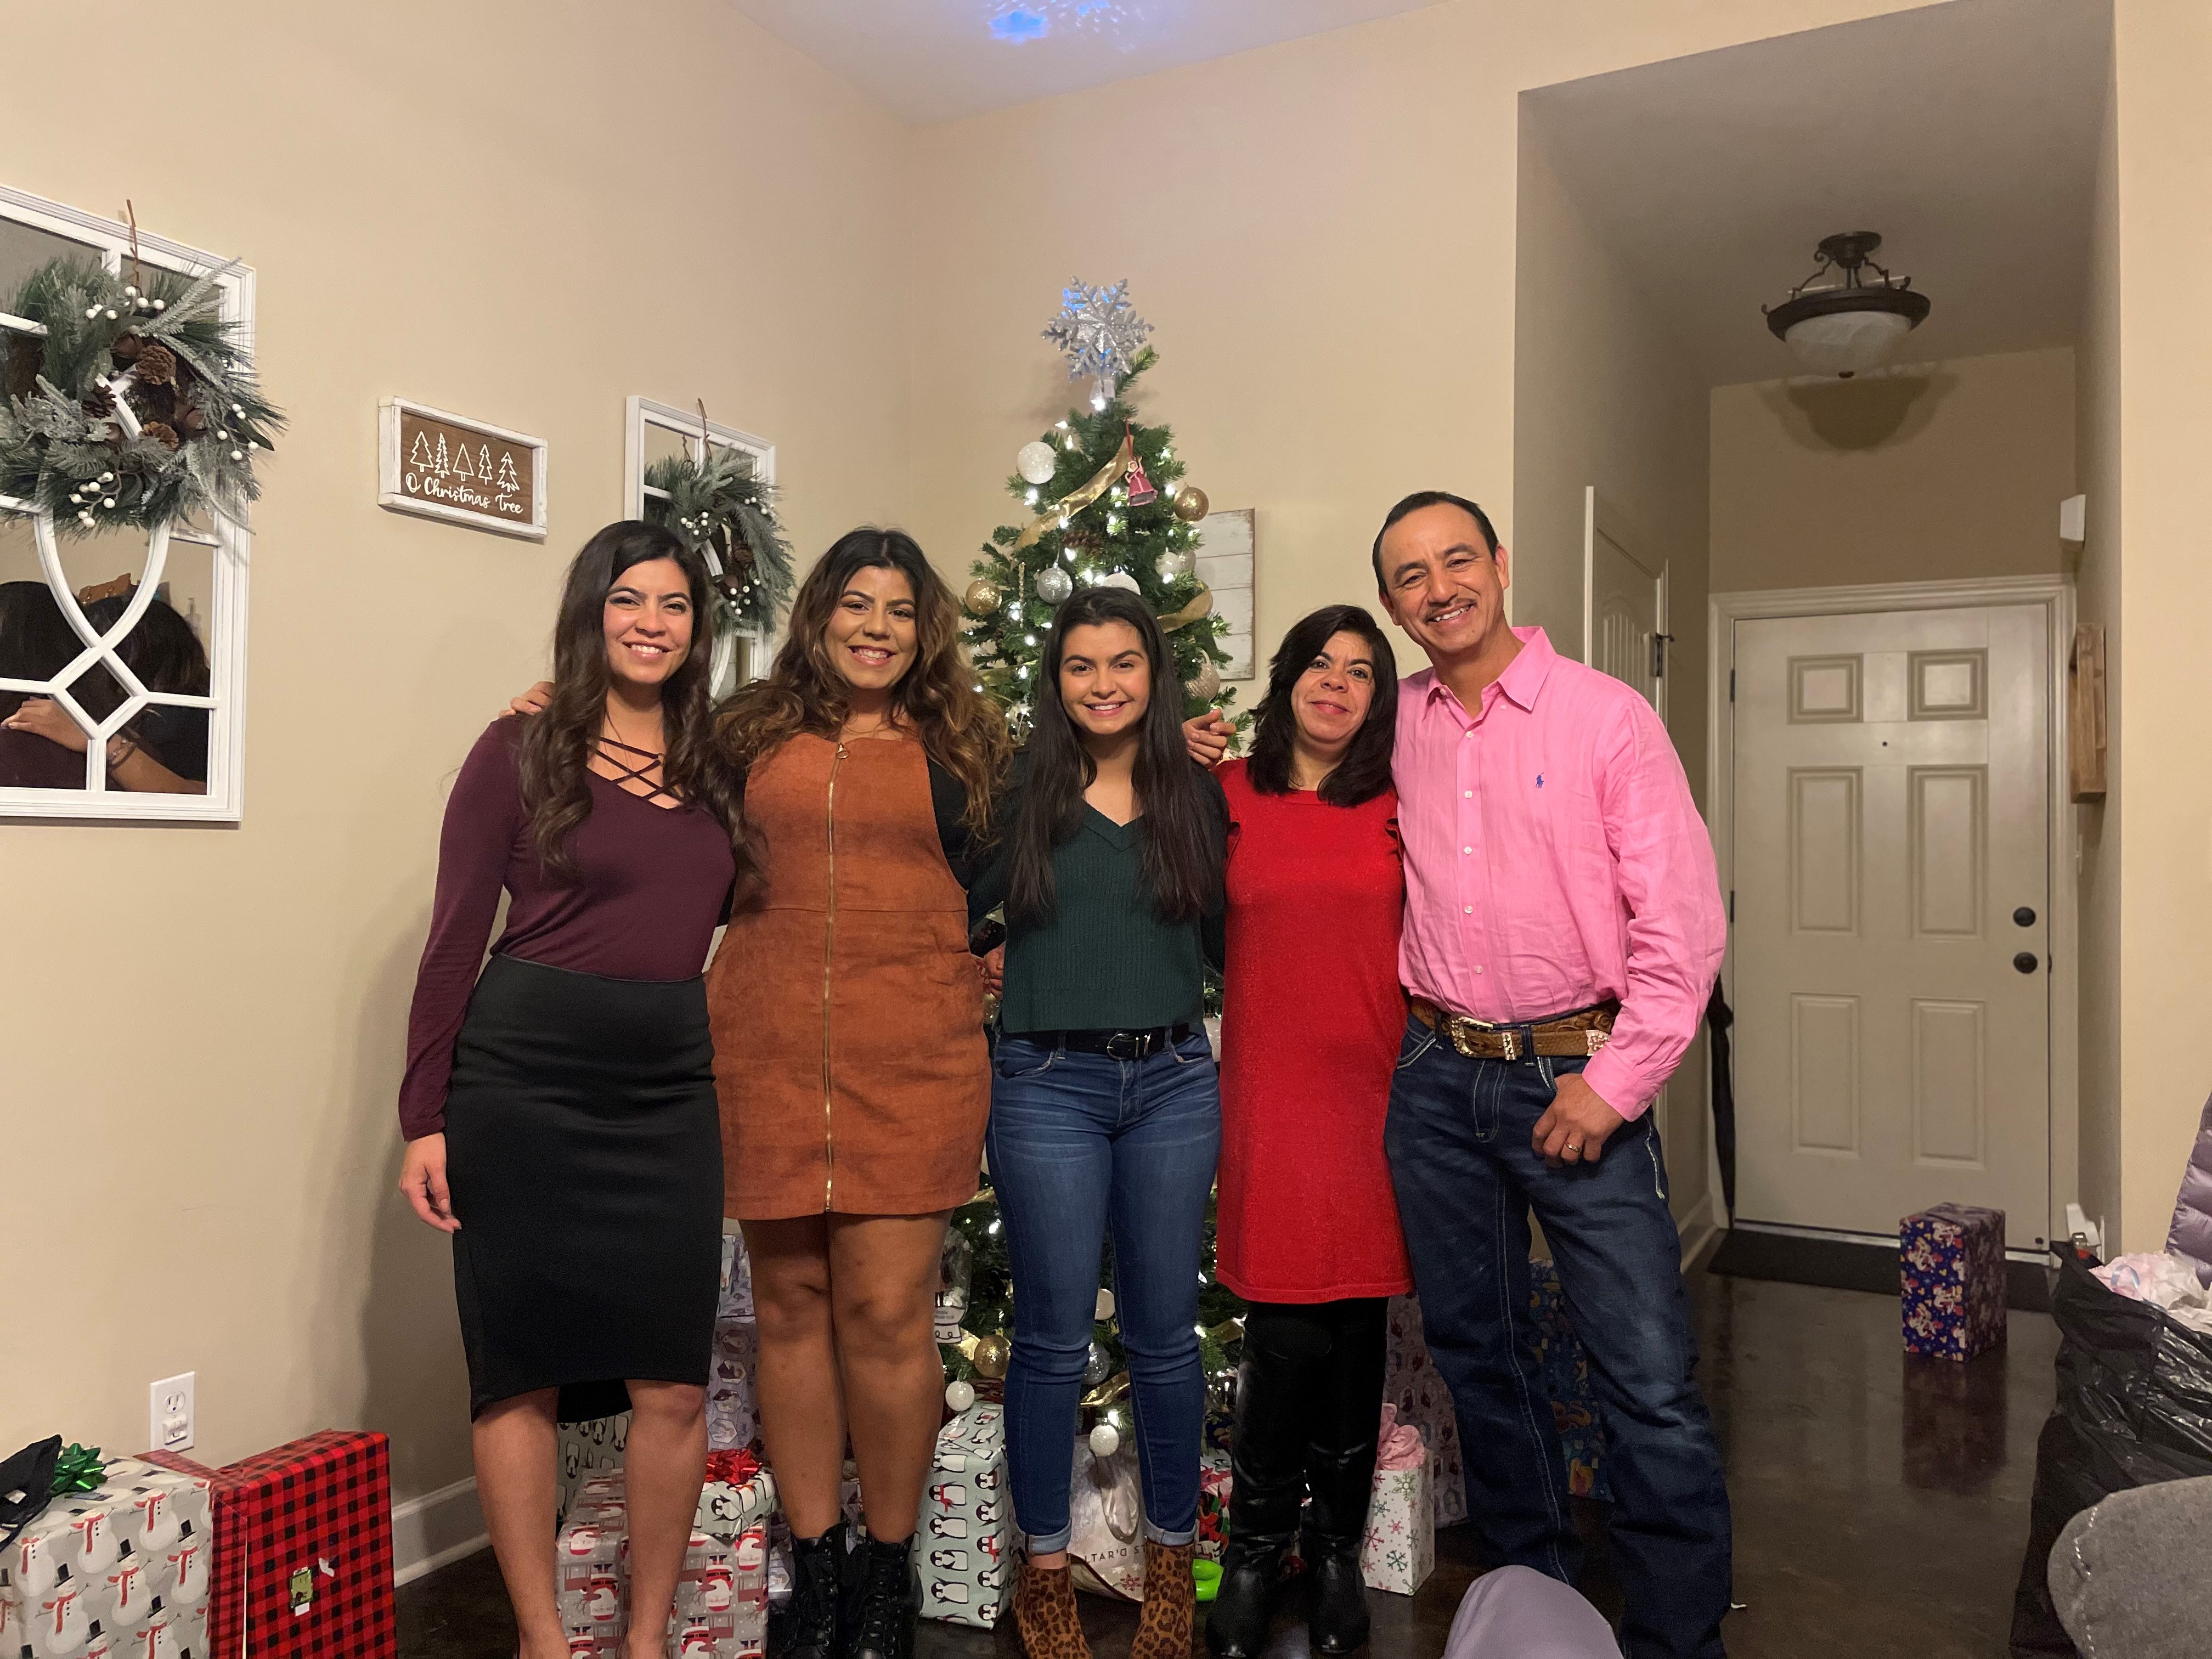 Gaby Bermudez and her family